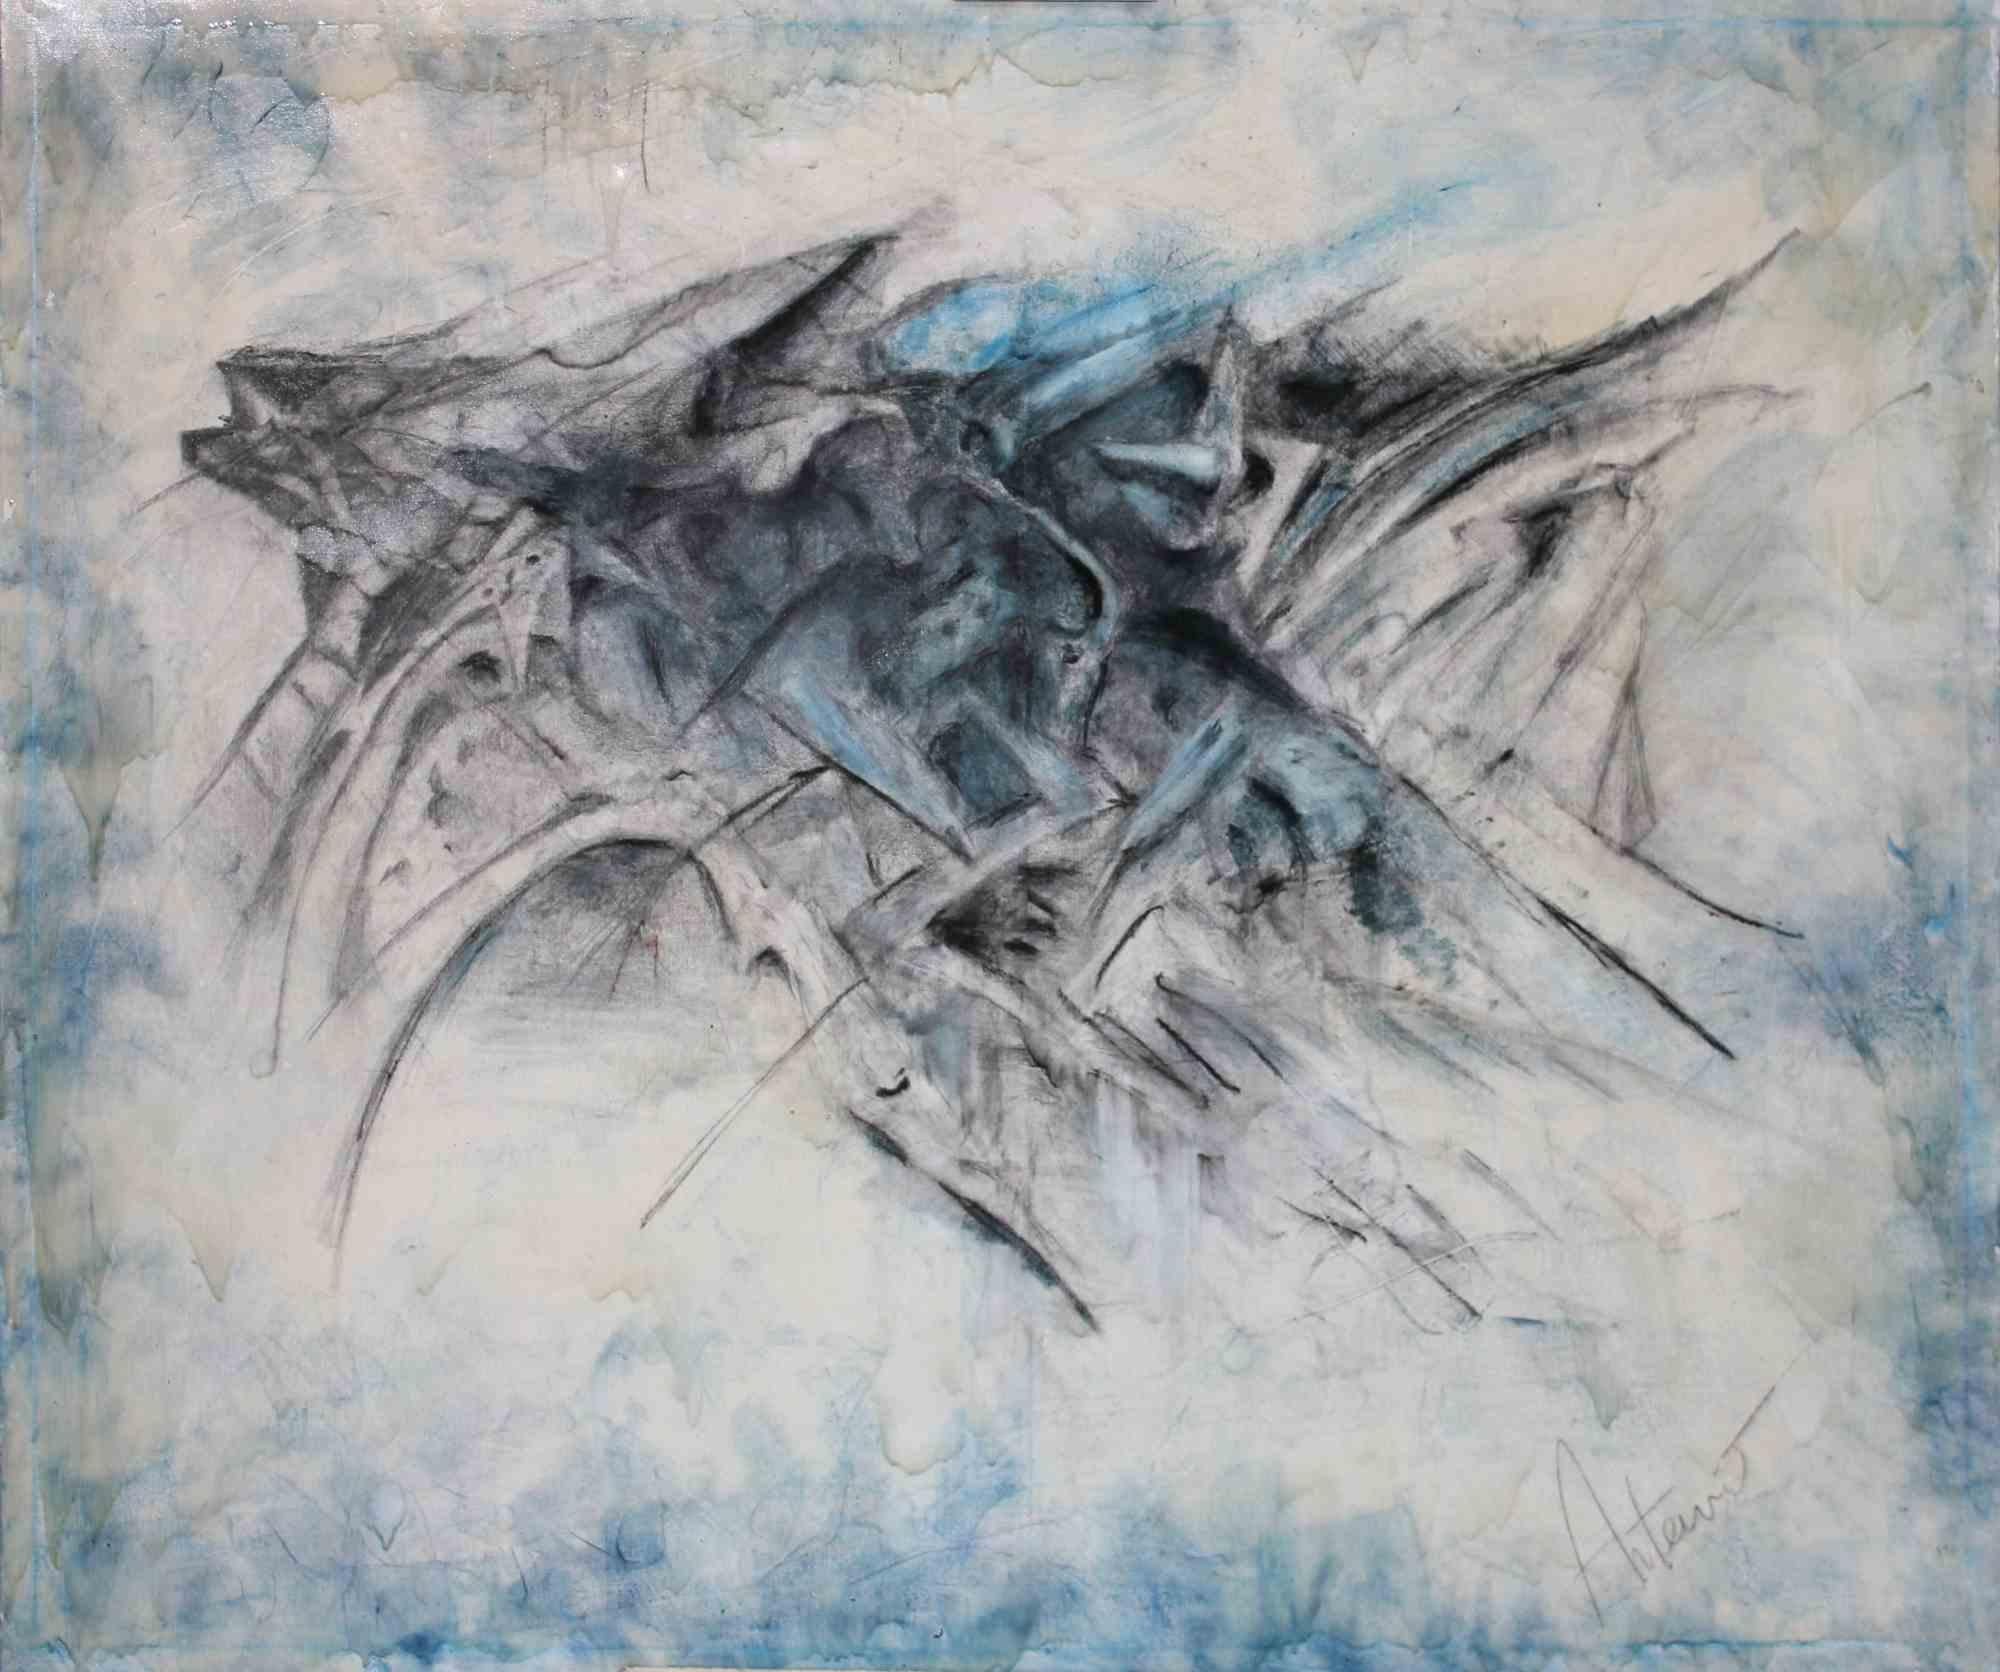 The work is titled "Glimpses of infinity 160 big" is part of the series "Glimpses of infinity" measuring 120 × 100 cm by artist Artemio Ceresa, it was created in 2019. The technique is mixed media on canvas and the signature on the front Artemio .